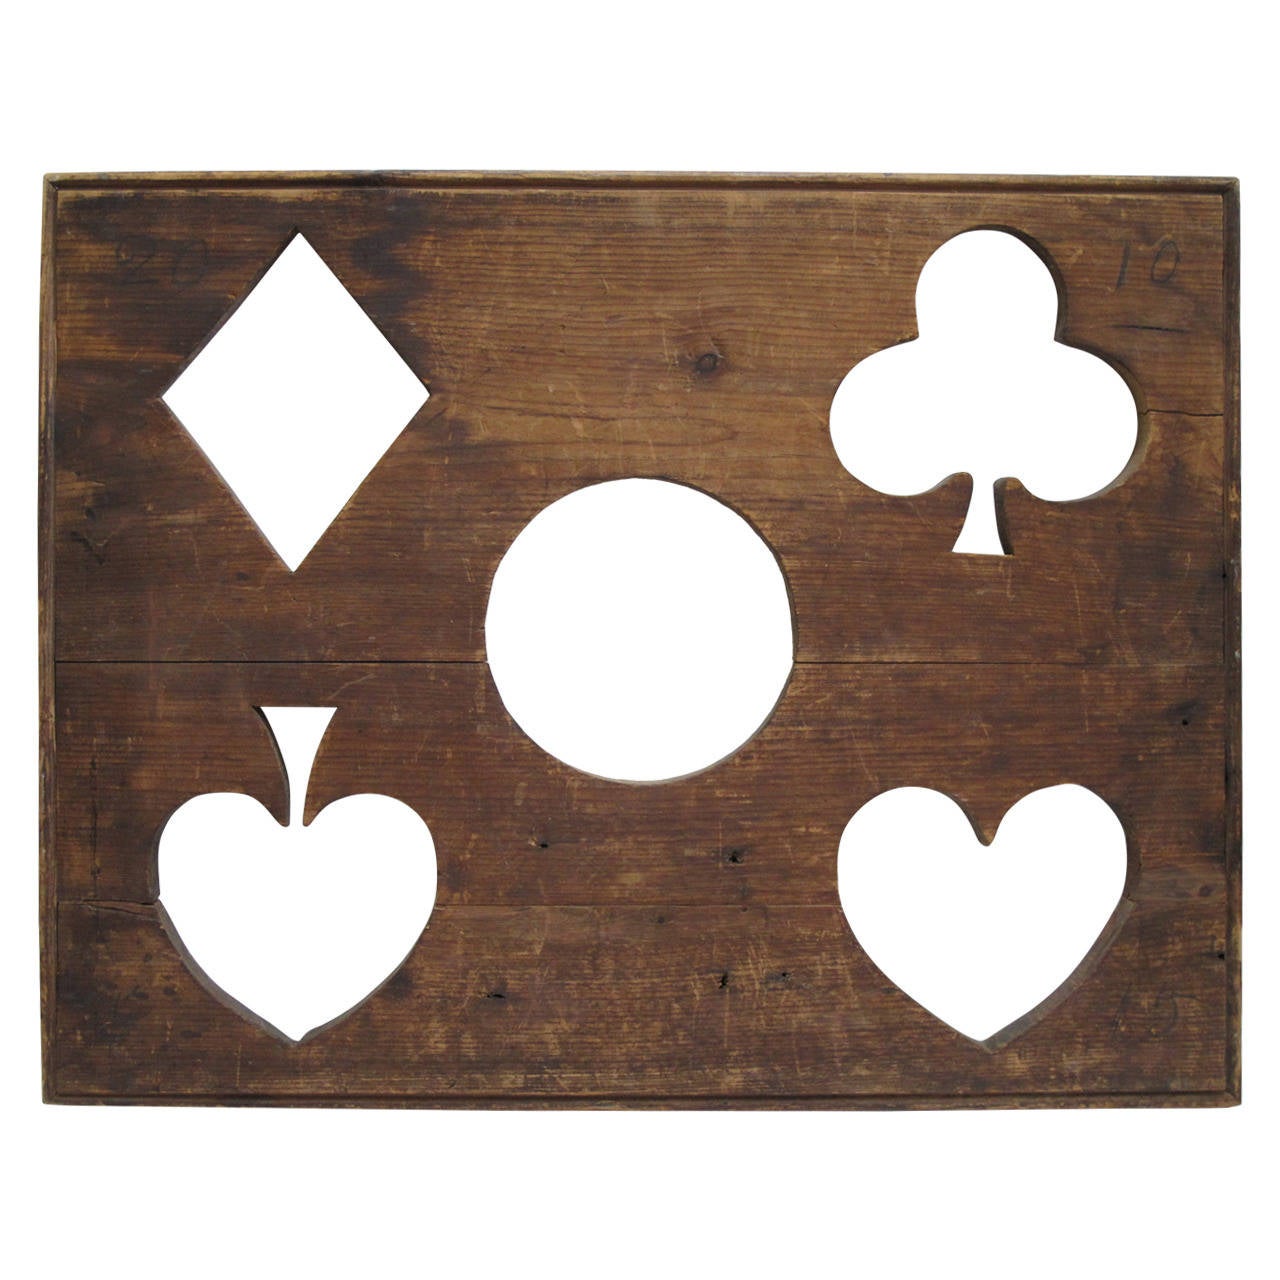 Card Suits Panel Game at 1stdibs